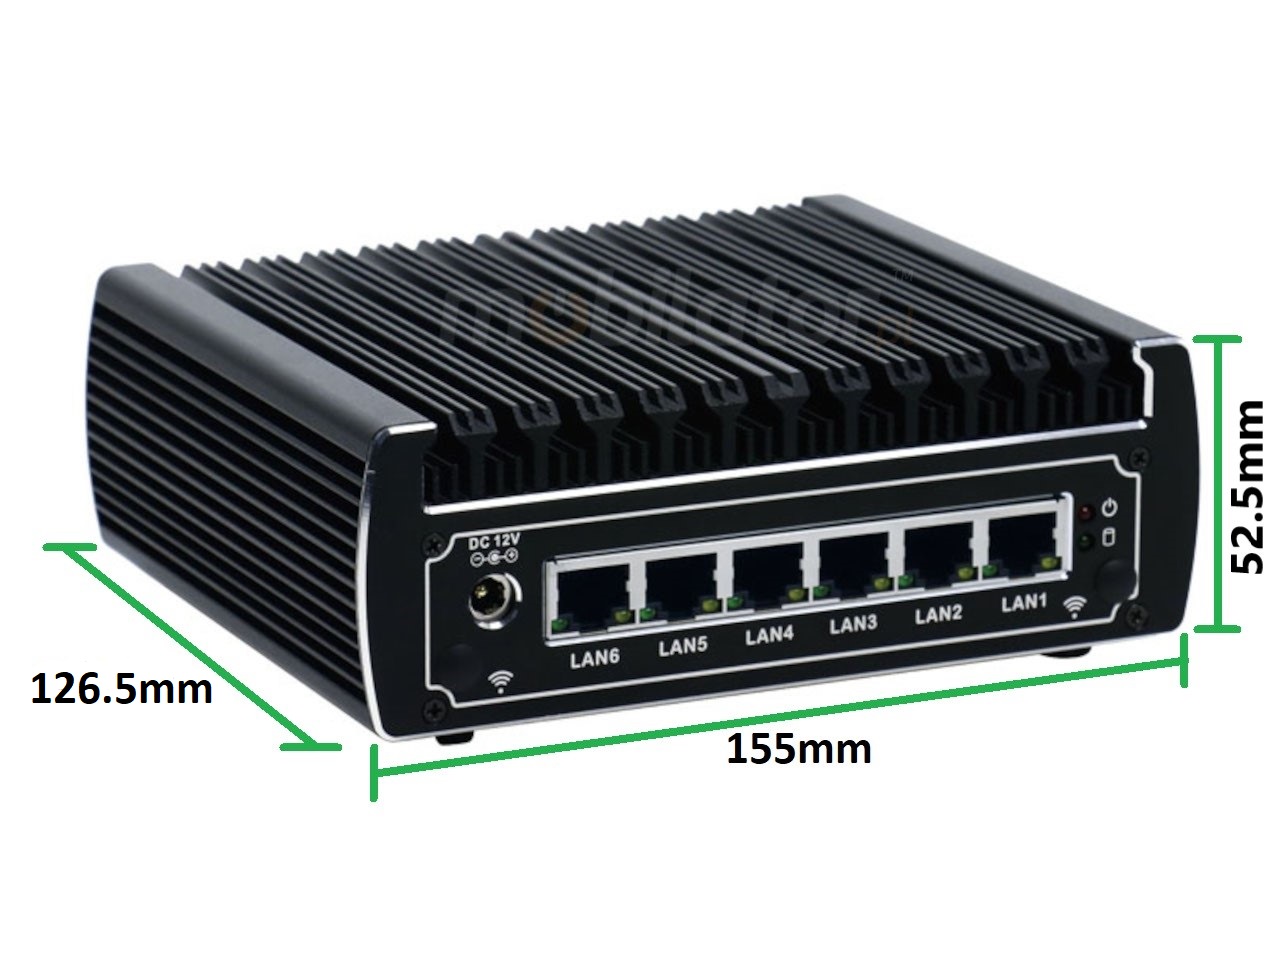  IBOX N133 v.7, size, industrial small fast reliable fanless industrial small LAN INTEL i3 HDD DDR4